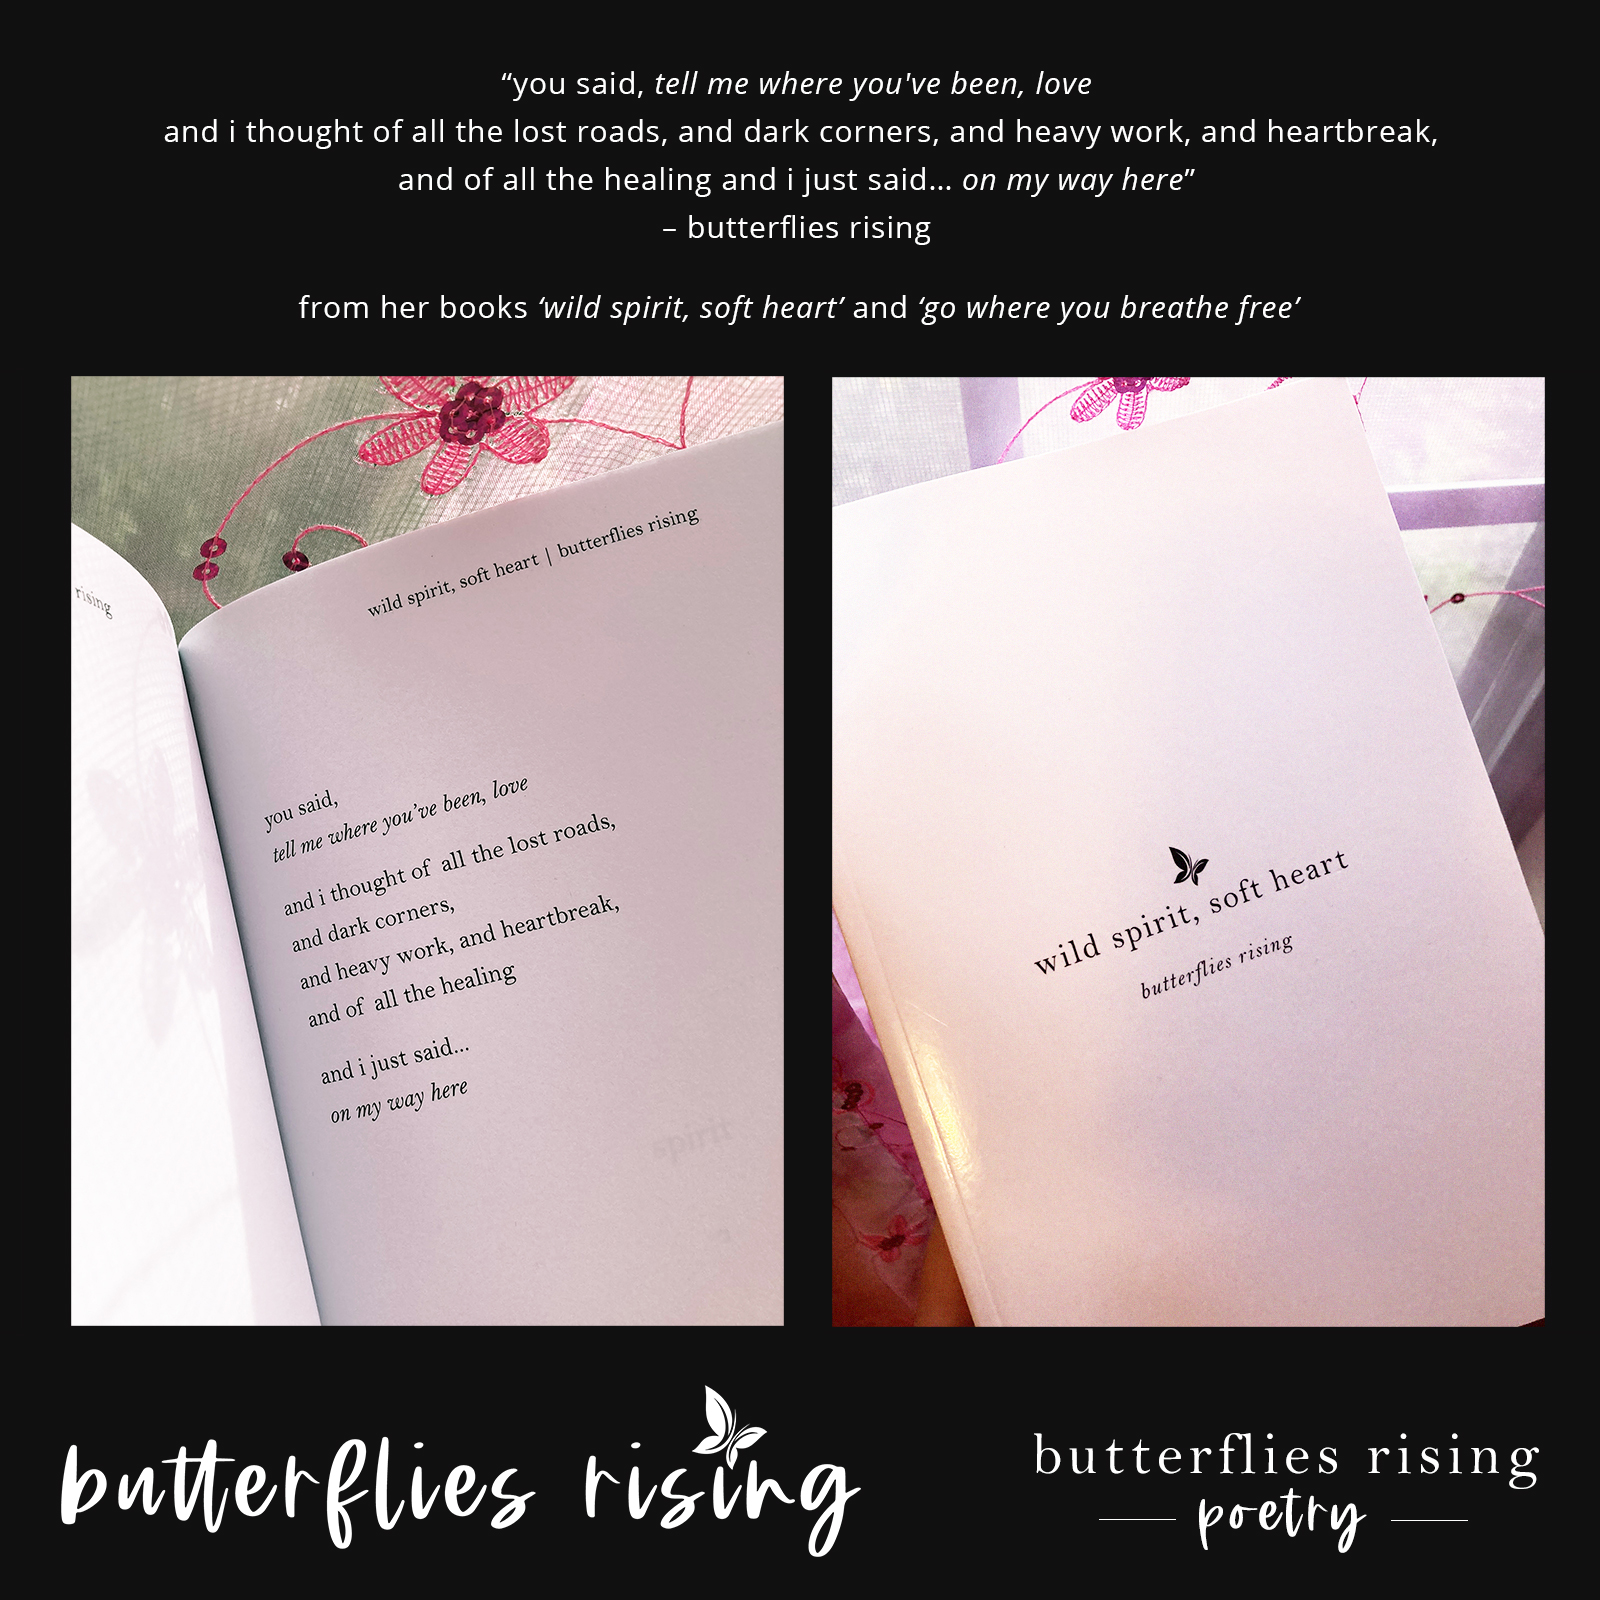 you said, tell me where you've been, love, and i thought of all the lost roads, and dark corners - butterflies rising